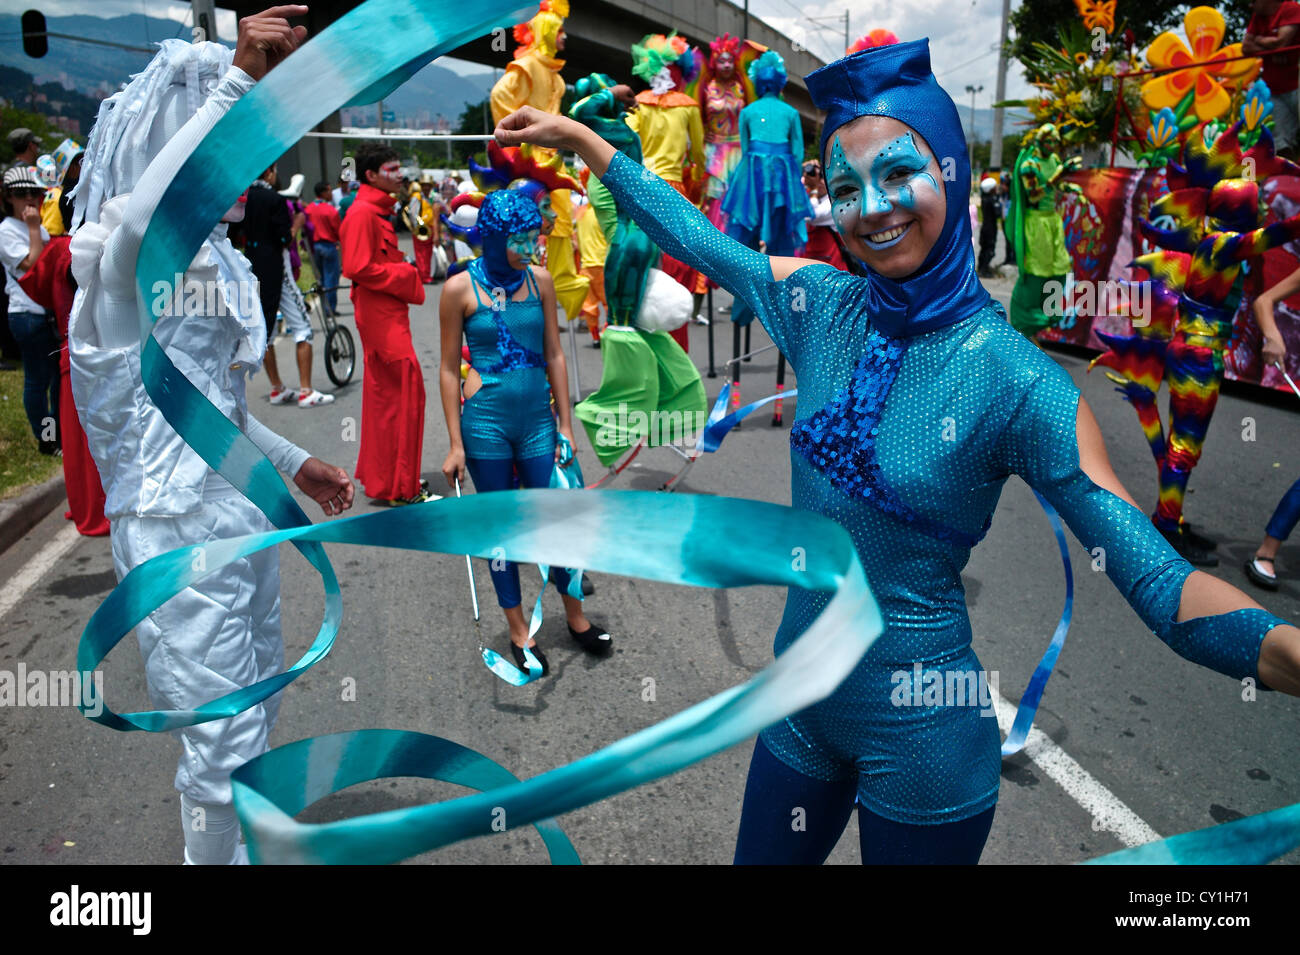 Colorful costumes create an ebullient scene at the Silleteros Parade. Stock Photo